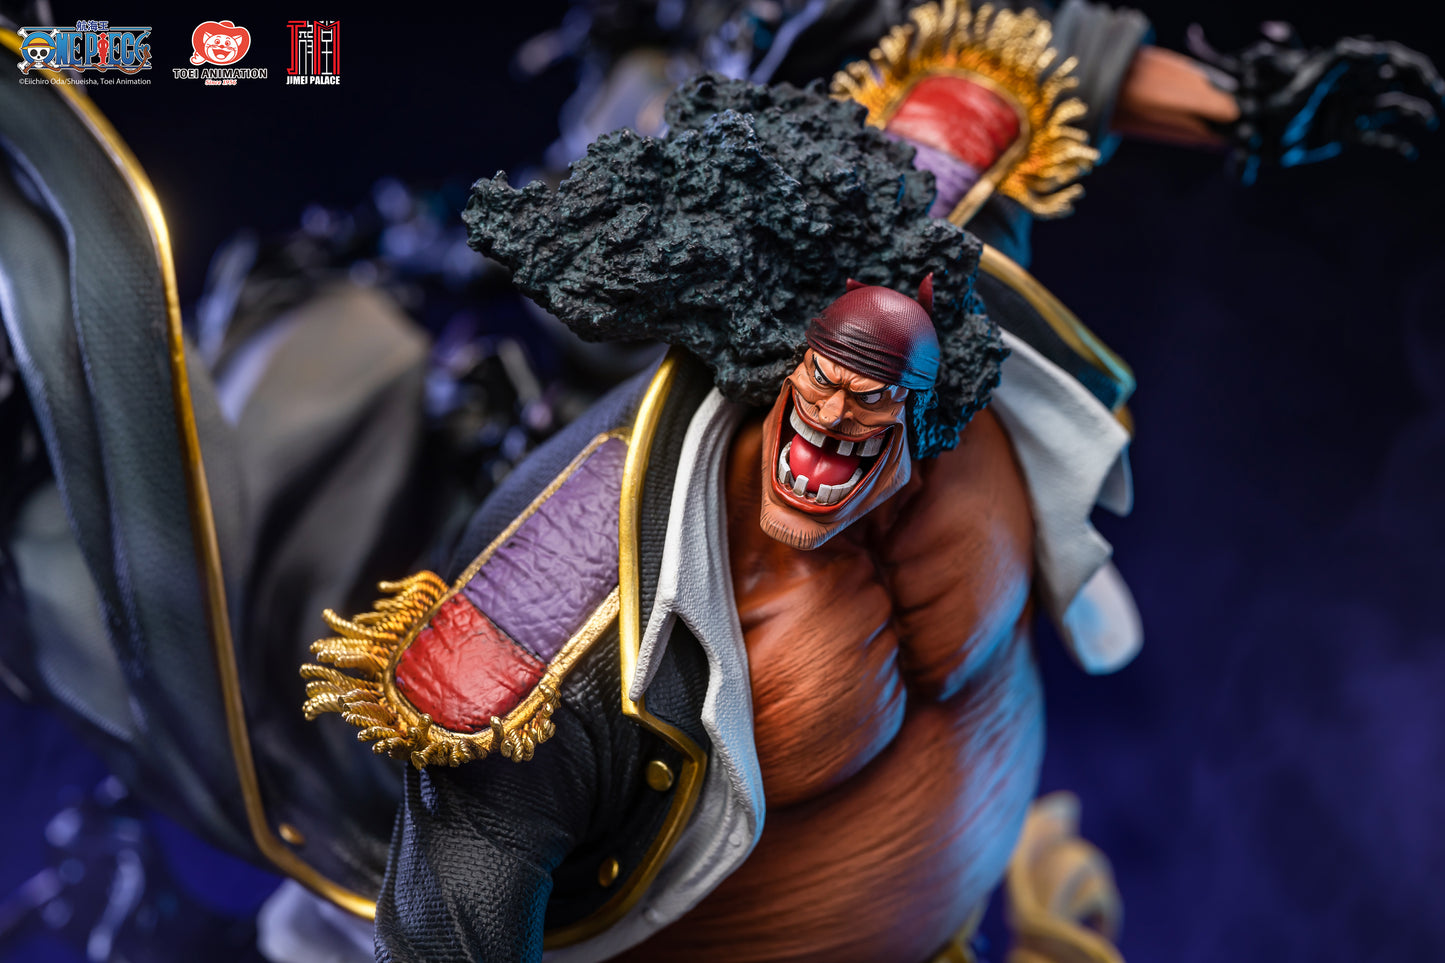 JIMEI PALACE STUDIO – ONE PIECE: MINI STATUE SERIES, PORTGAS D. ACE VS MARSHALL D. TEACH (LICENSED) [IN STOCK]